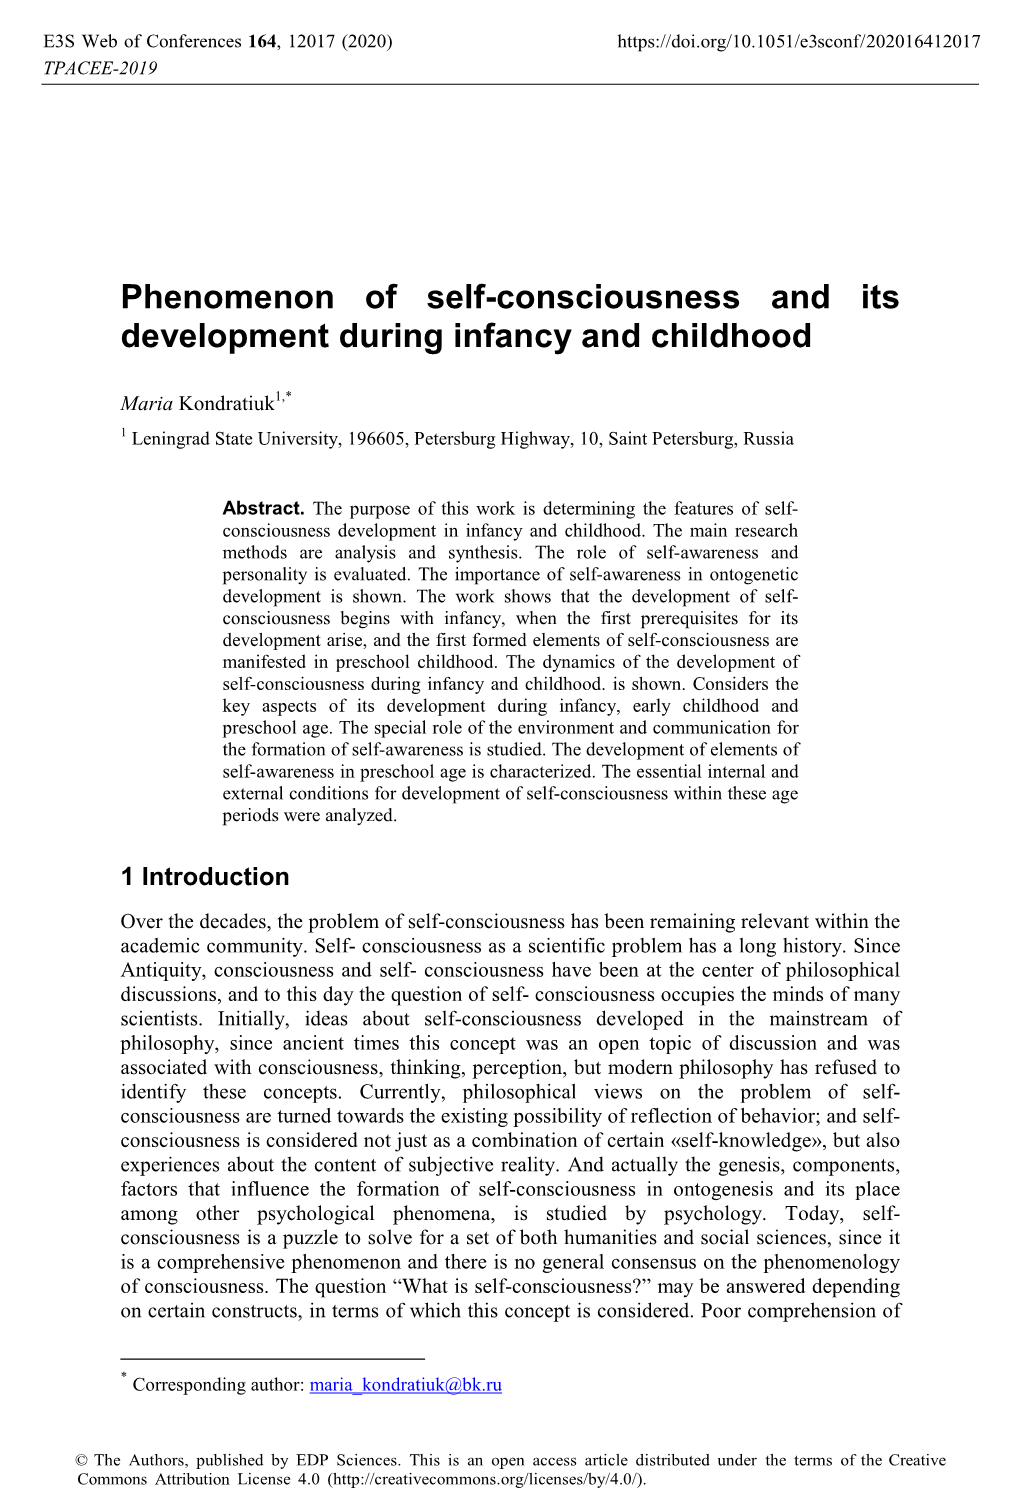 Phenomenon of Self-Consciousness and Its Development During Infancy and Childhood